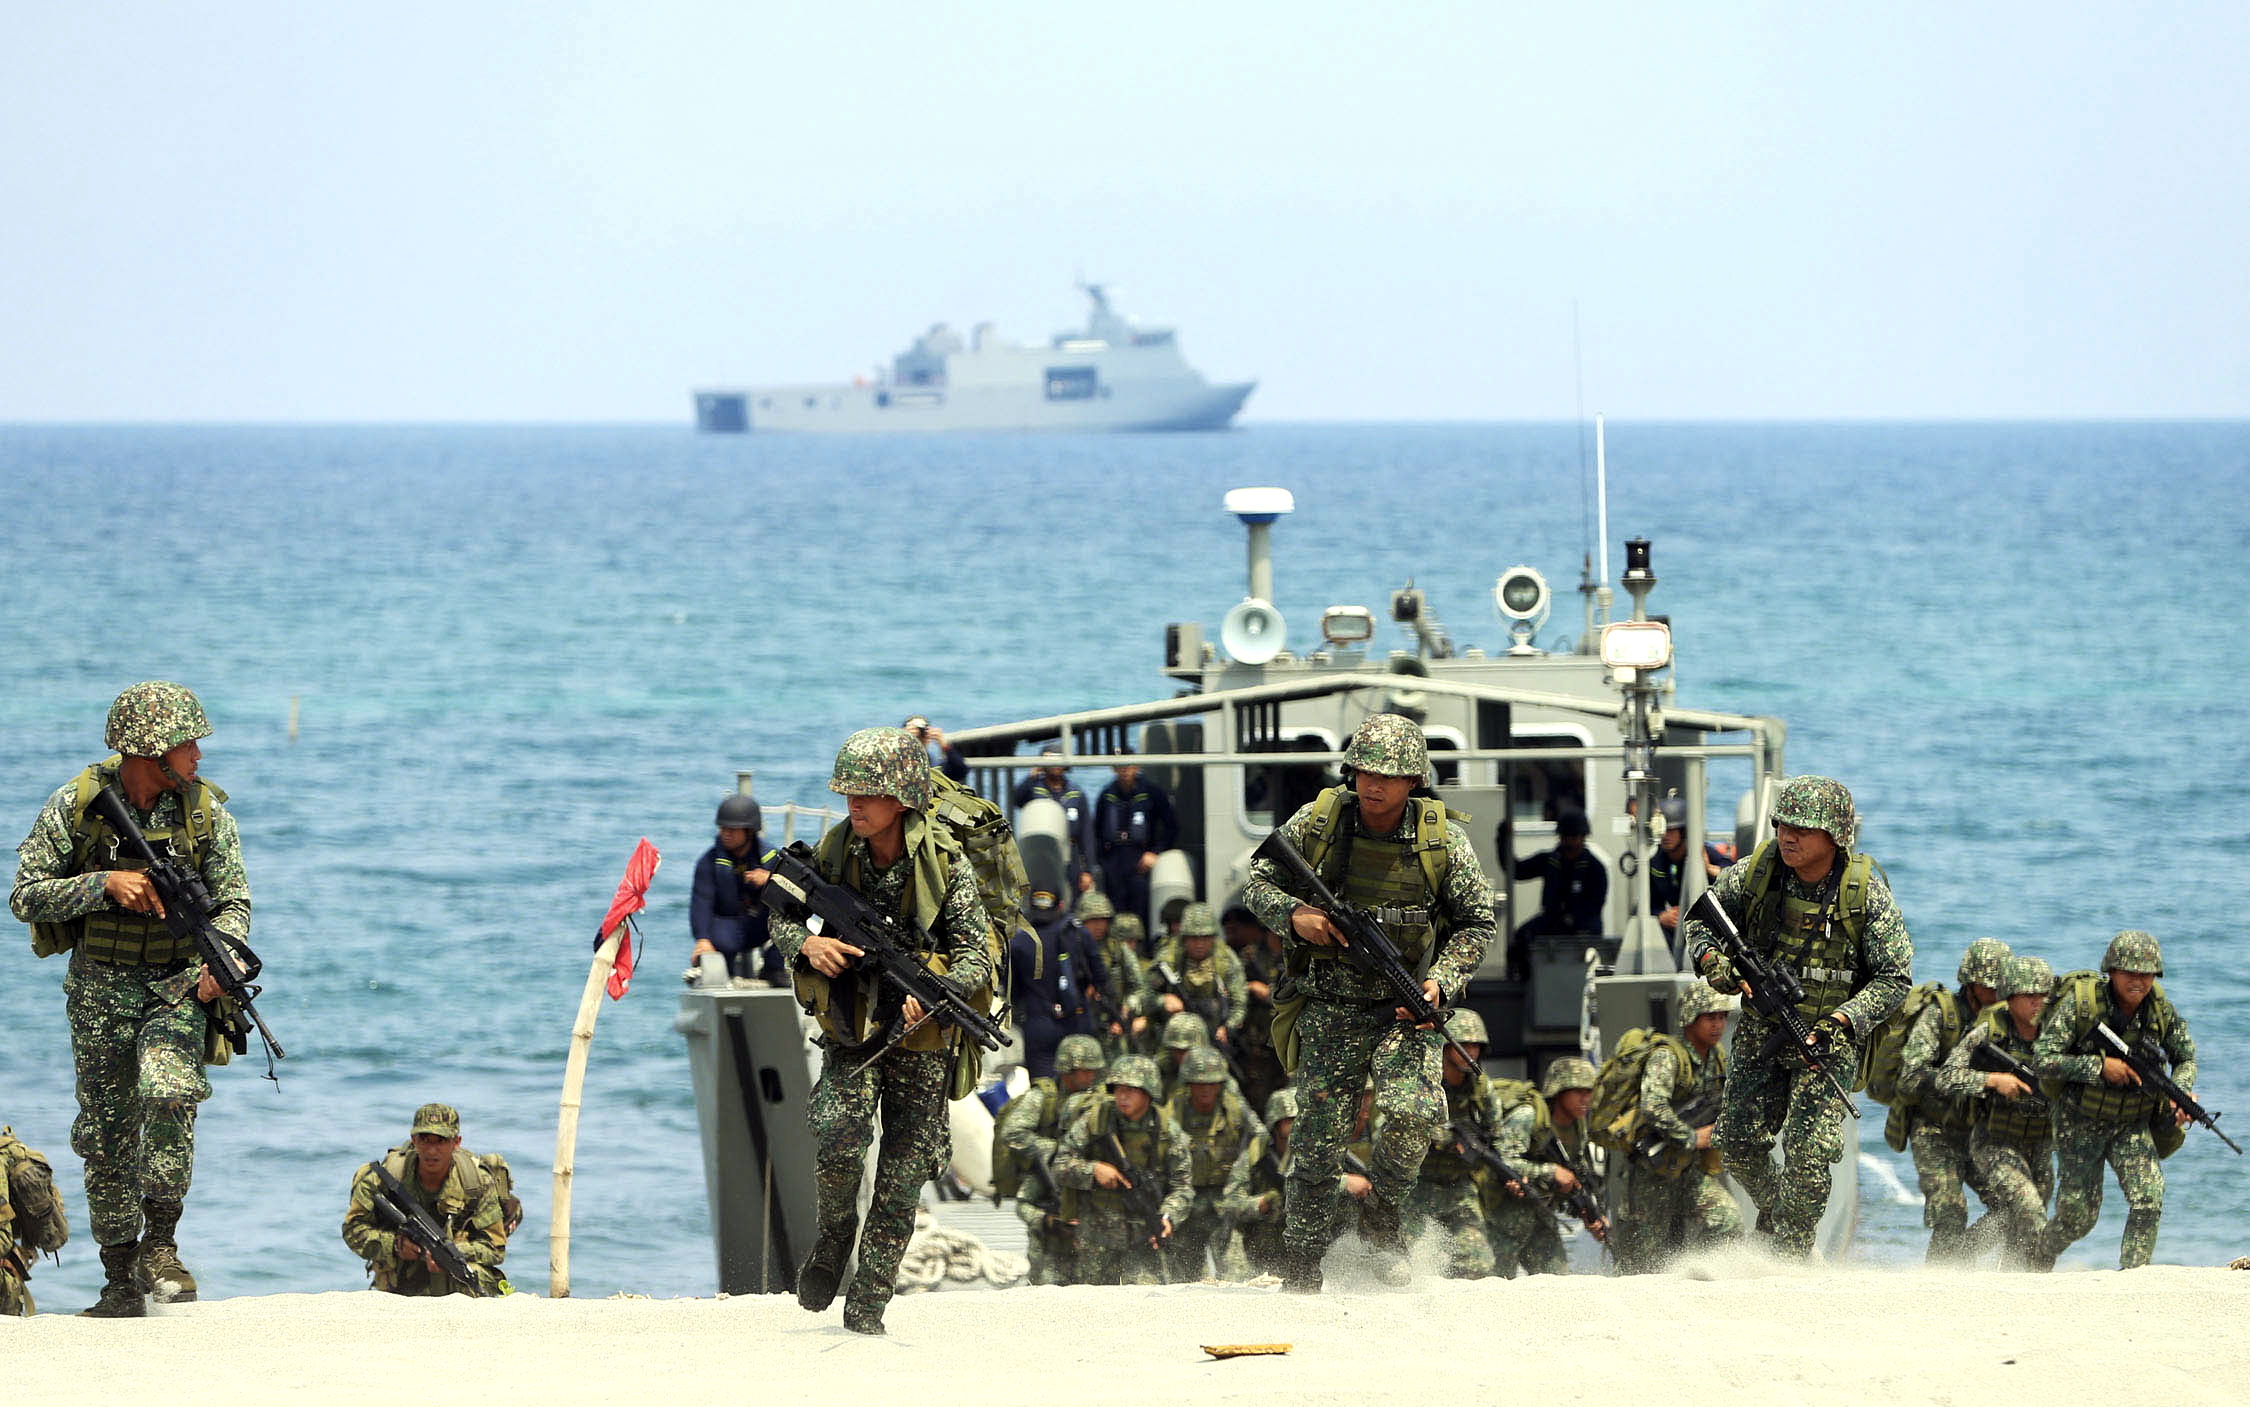 TRAINING TOGETHER U.S. and Philippine soldiers simulate an attack during the joint U.S.-Philippine military exercise Balikatan at the Naval Training Exercise Command in San Antonio, Zambales Province, in 2018. —INQUIRER FILE PHOTO